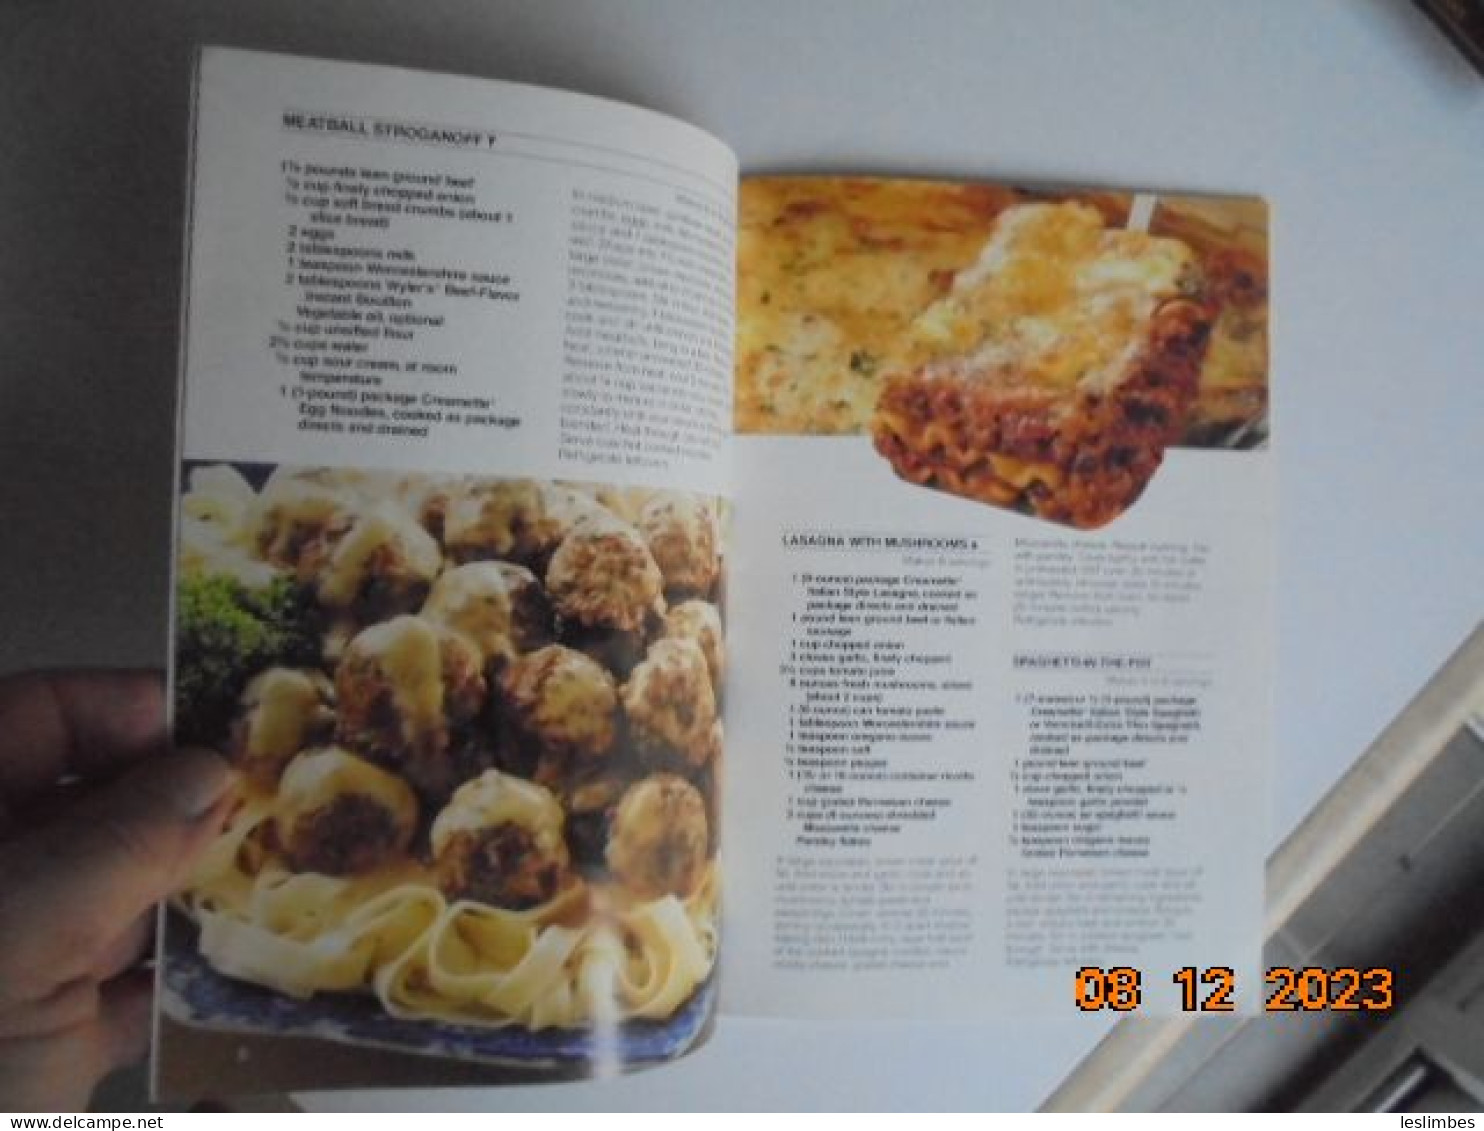 Tried & True Money Saving Meals. A New Idea Book From Creamettes And Borden - 1981 - Américaine